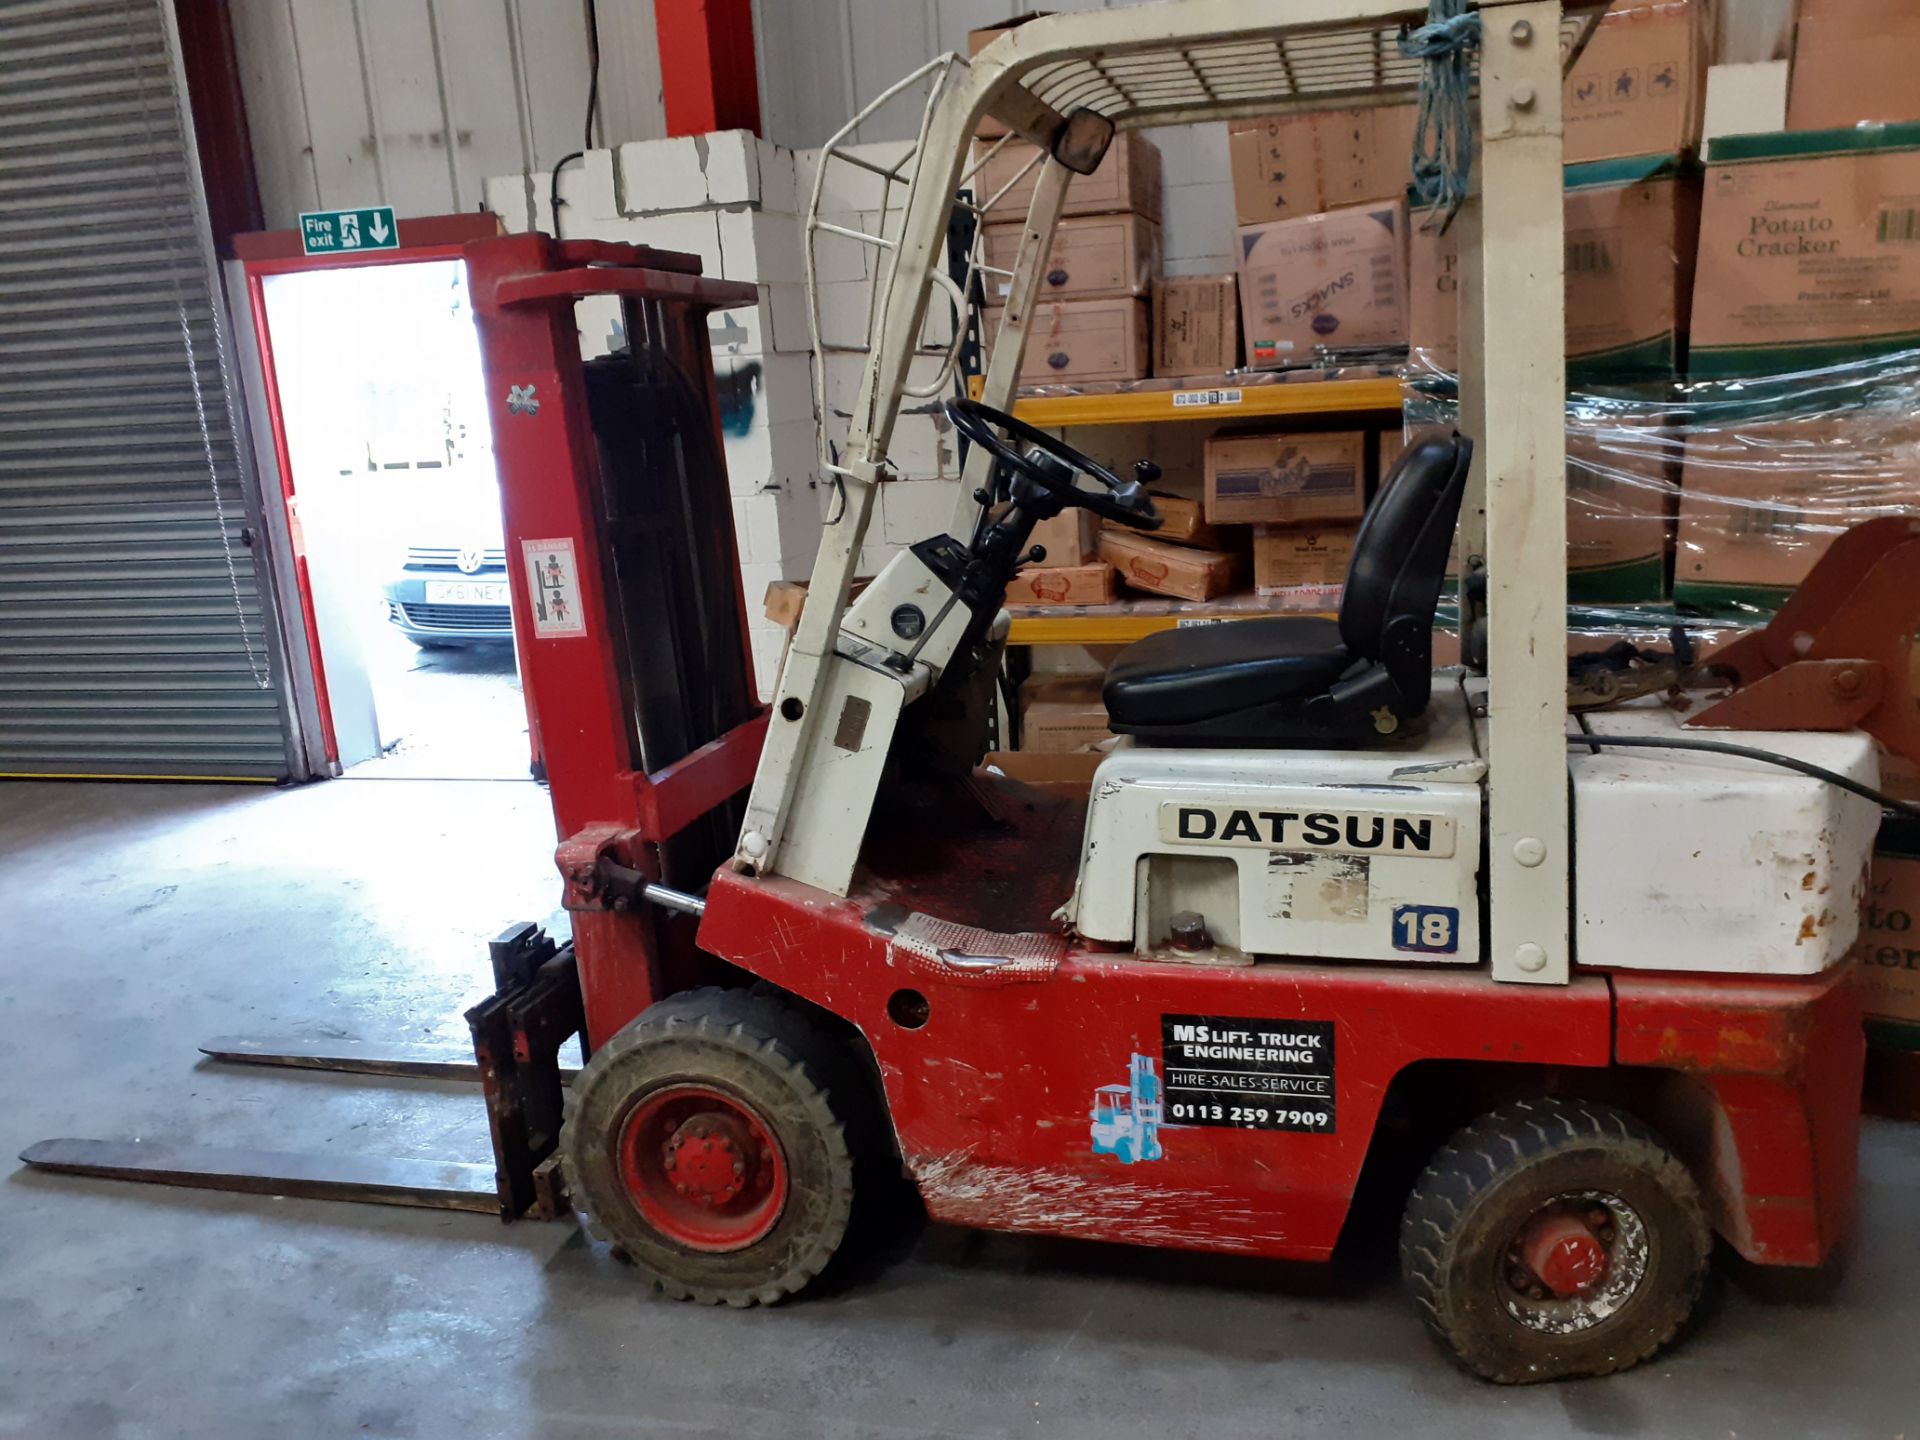 Datsun 1.8 Forklift truck gas. Short mast Designed to go inside containers Lift height approx 2m